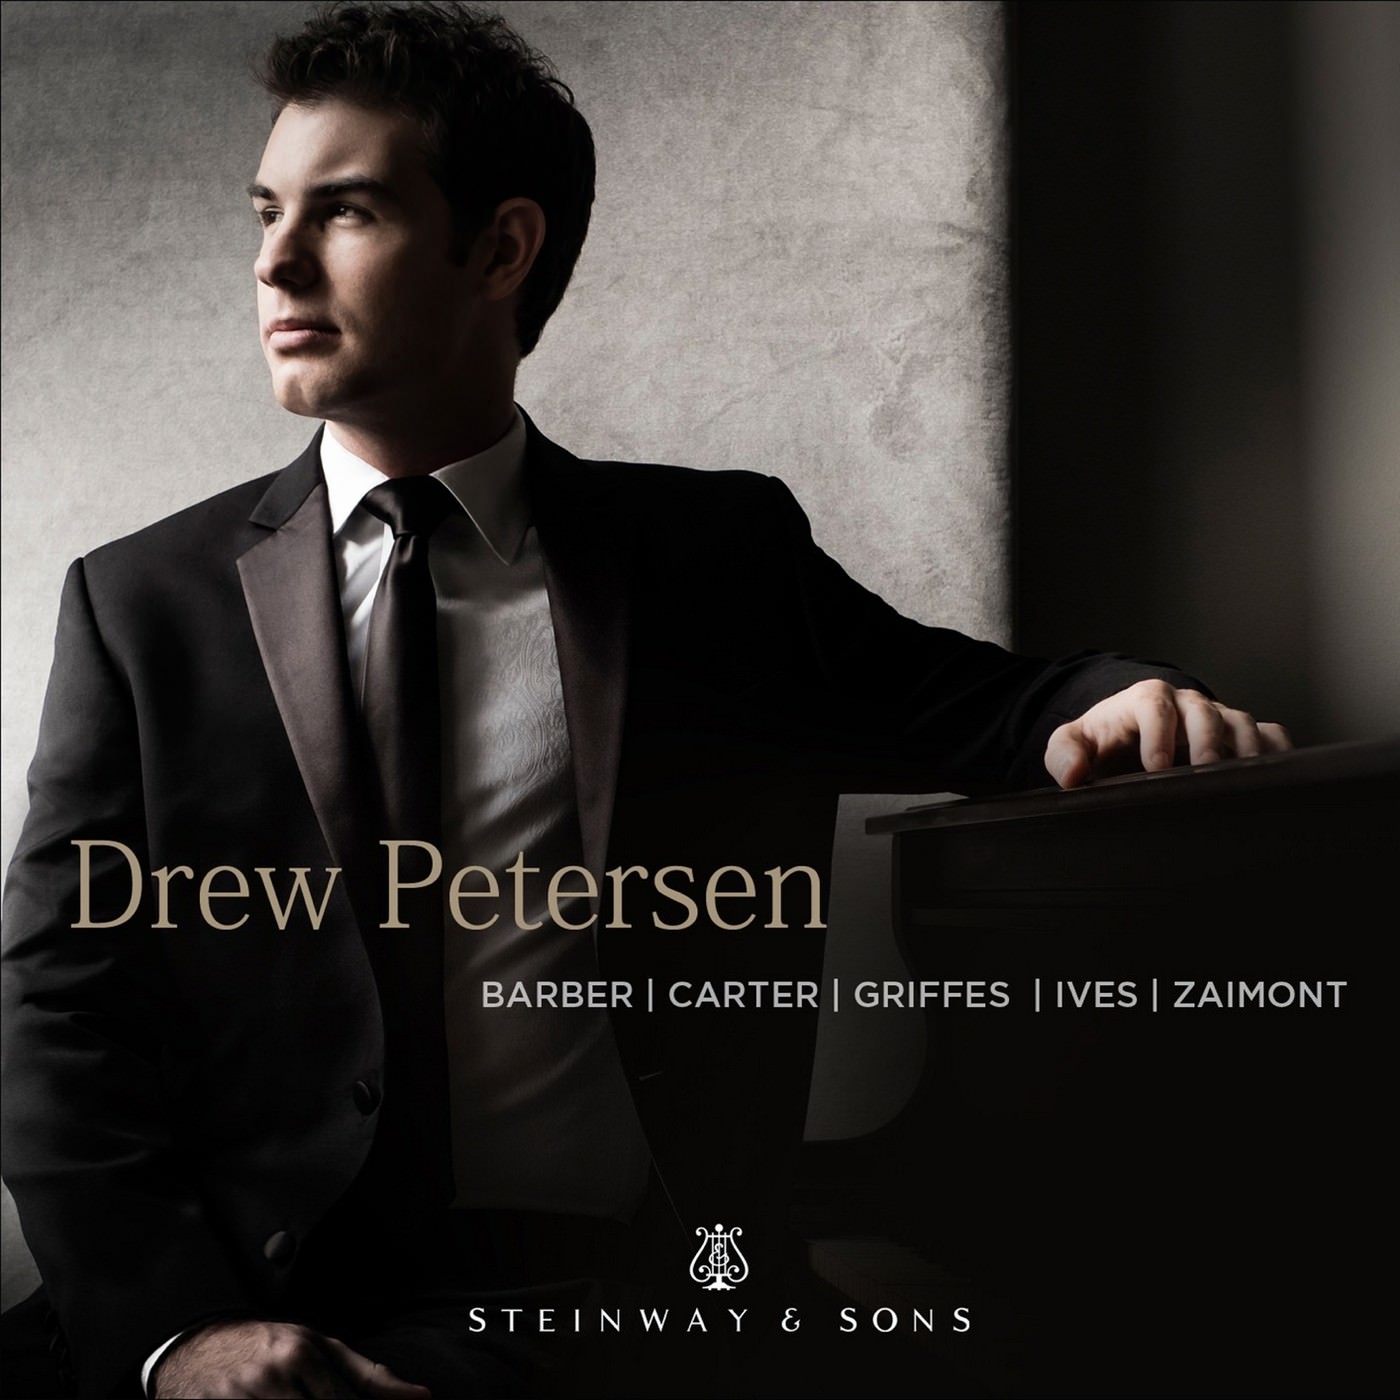 Drew Petersen – Barber, Carter, Griffes & Others: Piano Works (2018) [FLAC 24bit/192kHz]